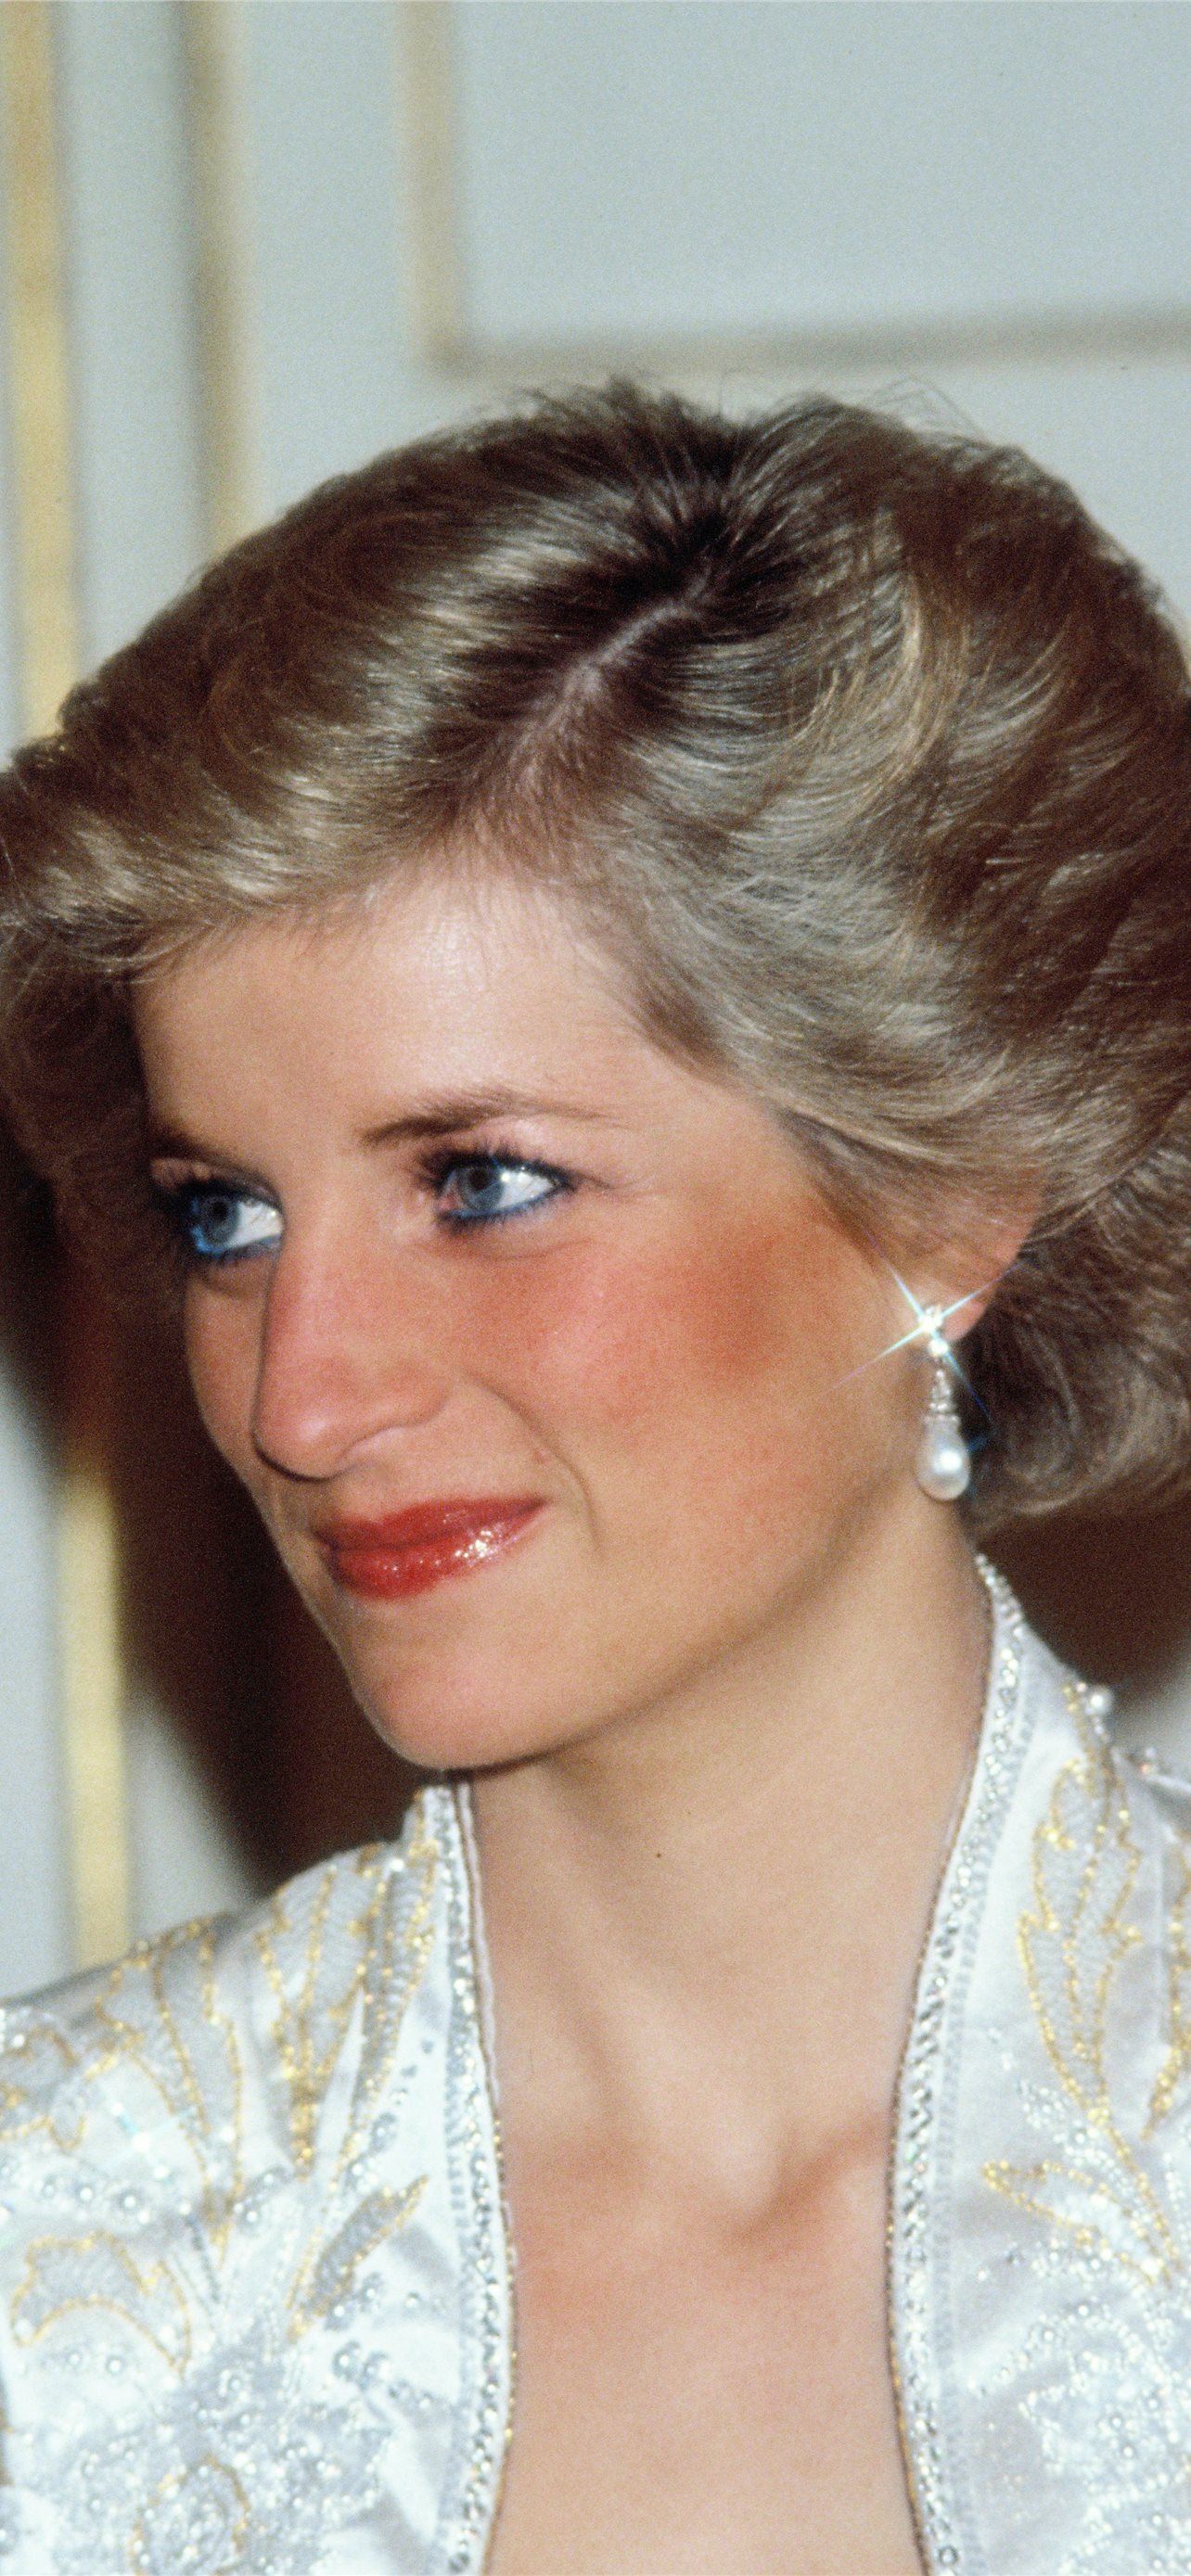 The 25 Most Iconic Photographs of Princess Diana  Vogue